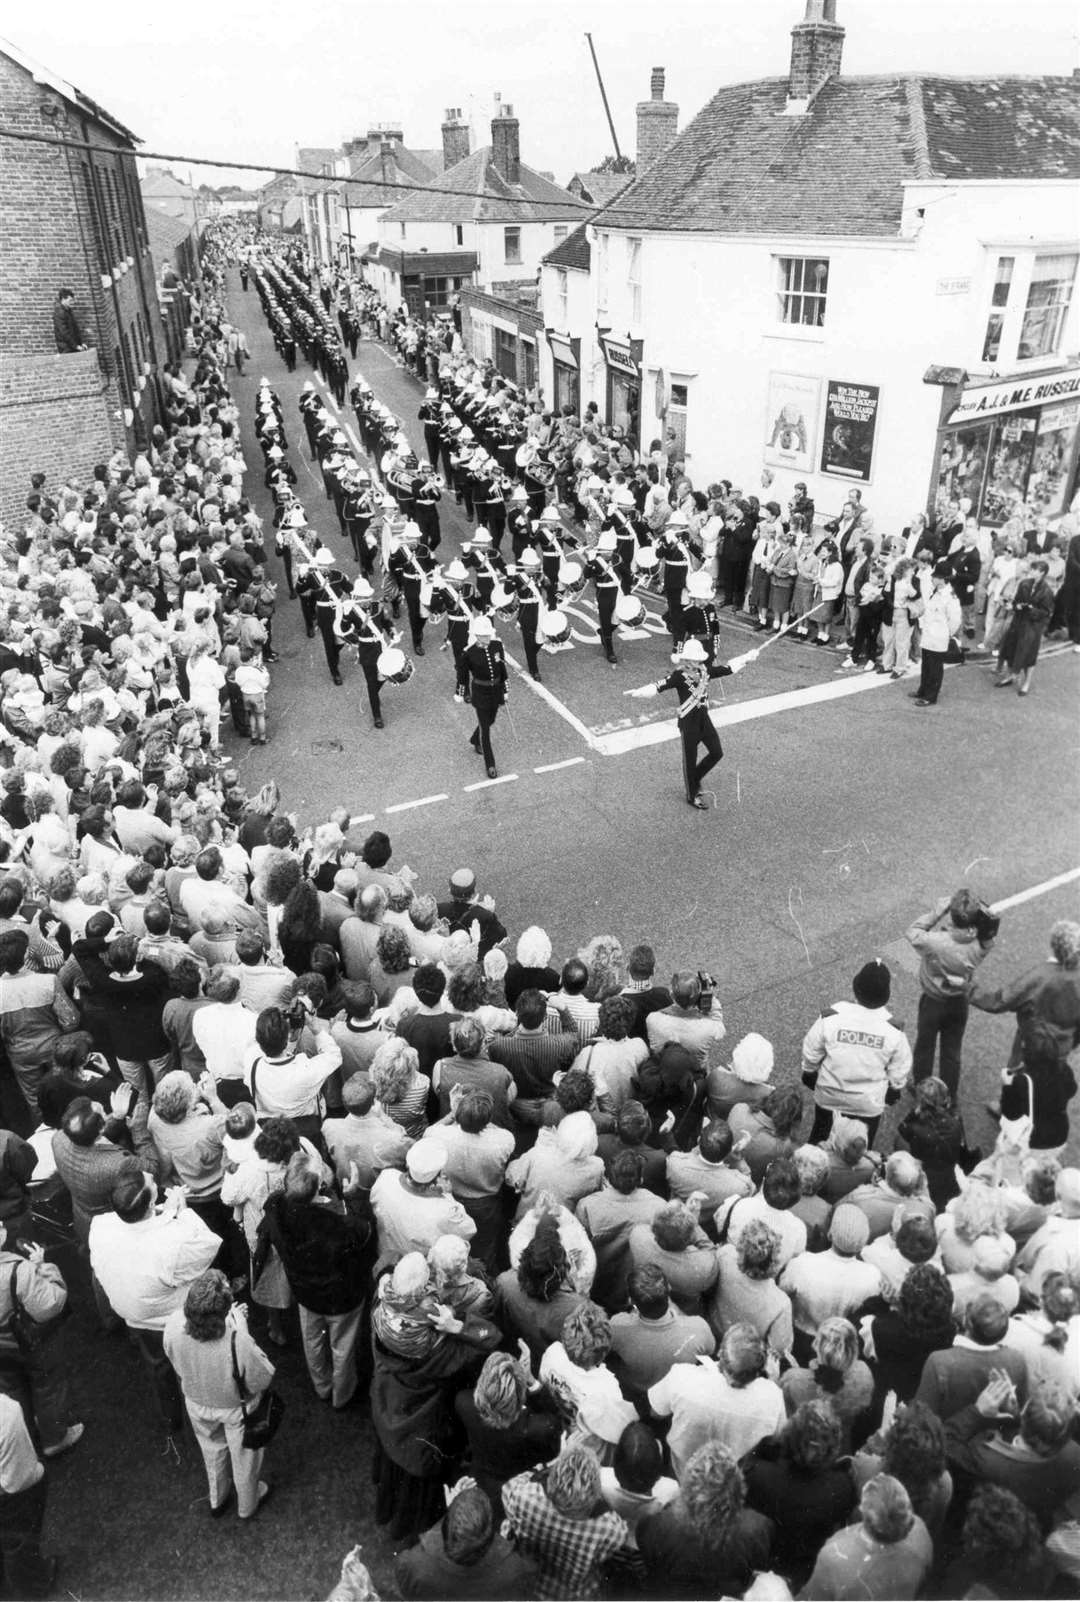 The spirit of the Marines was on show again exactly one week after the bomb, as the full staff band in full panoply marched through the town, applauded and cheered by hundreds of residents